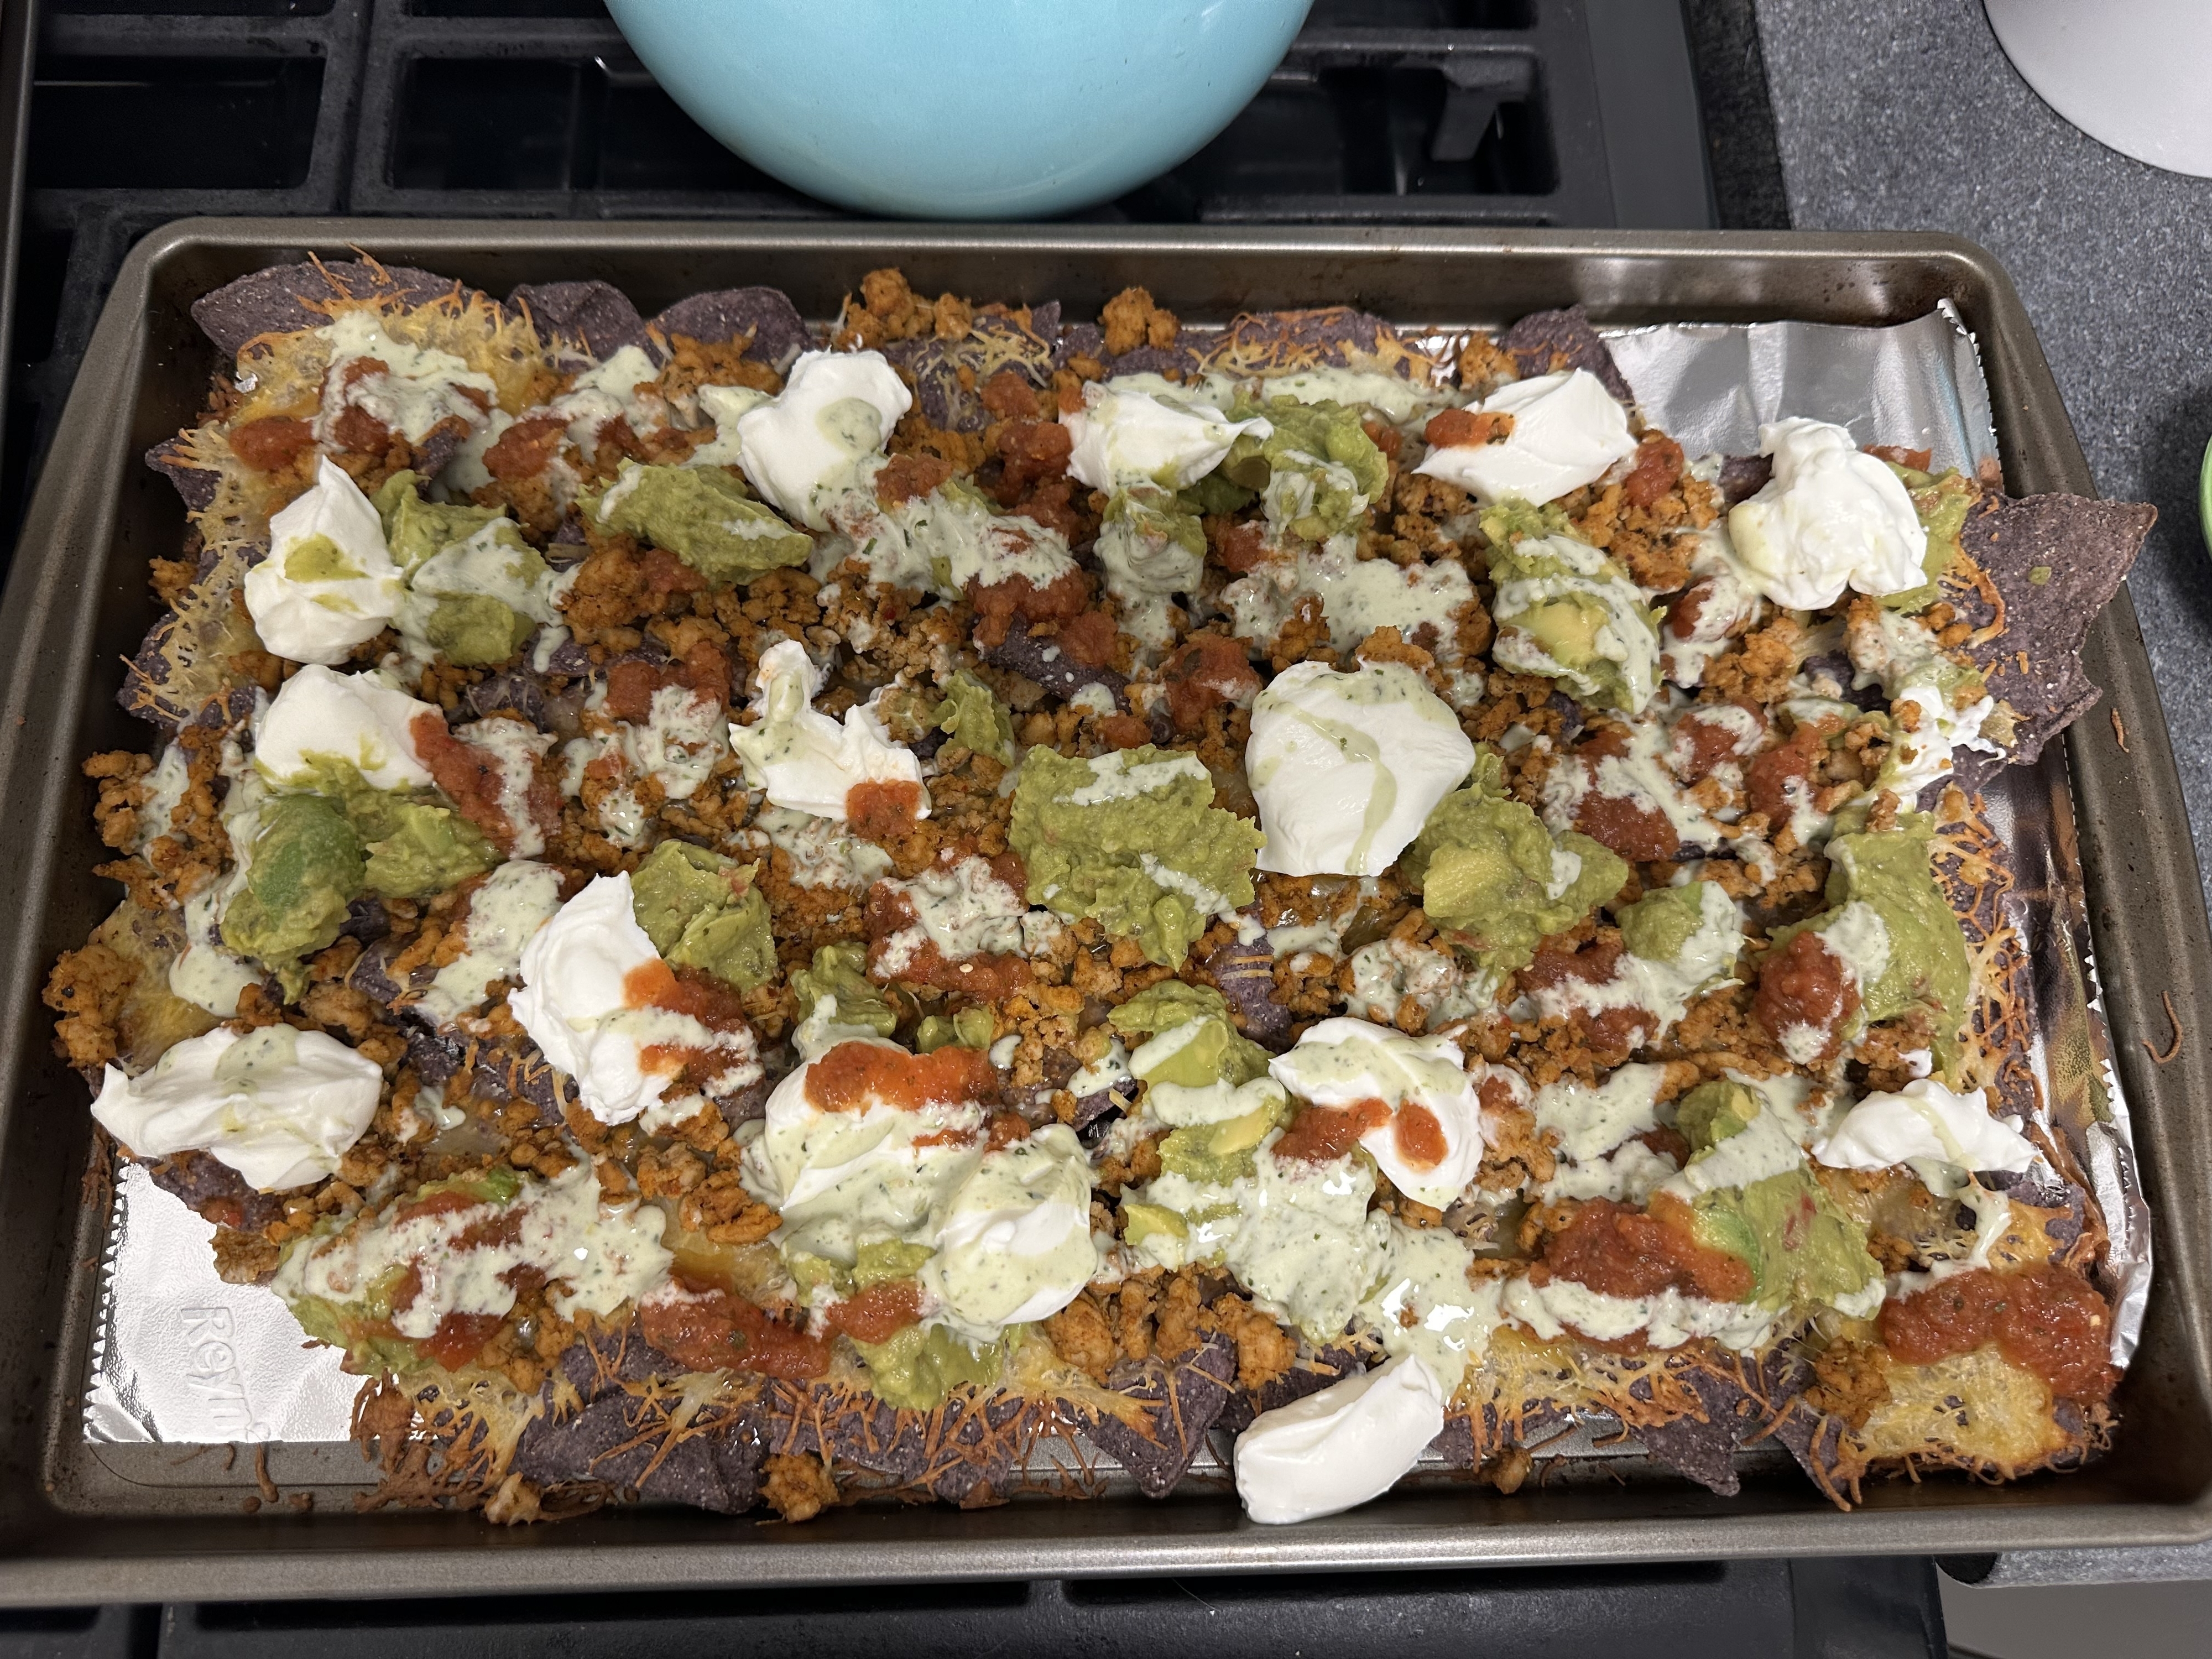 Tray of nachos loaded with various toppings like cheese, dollops of sour cream, and guacamole